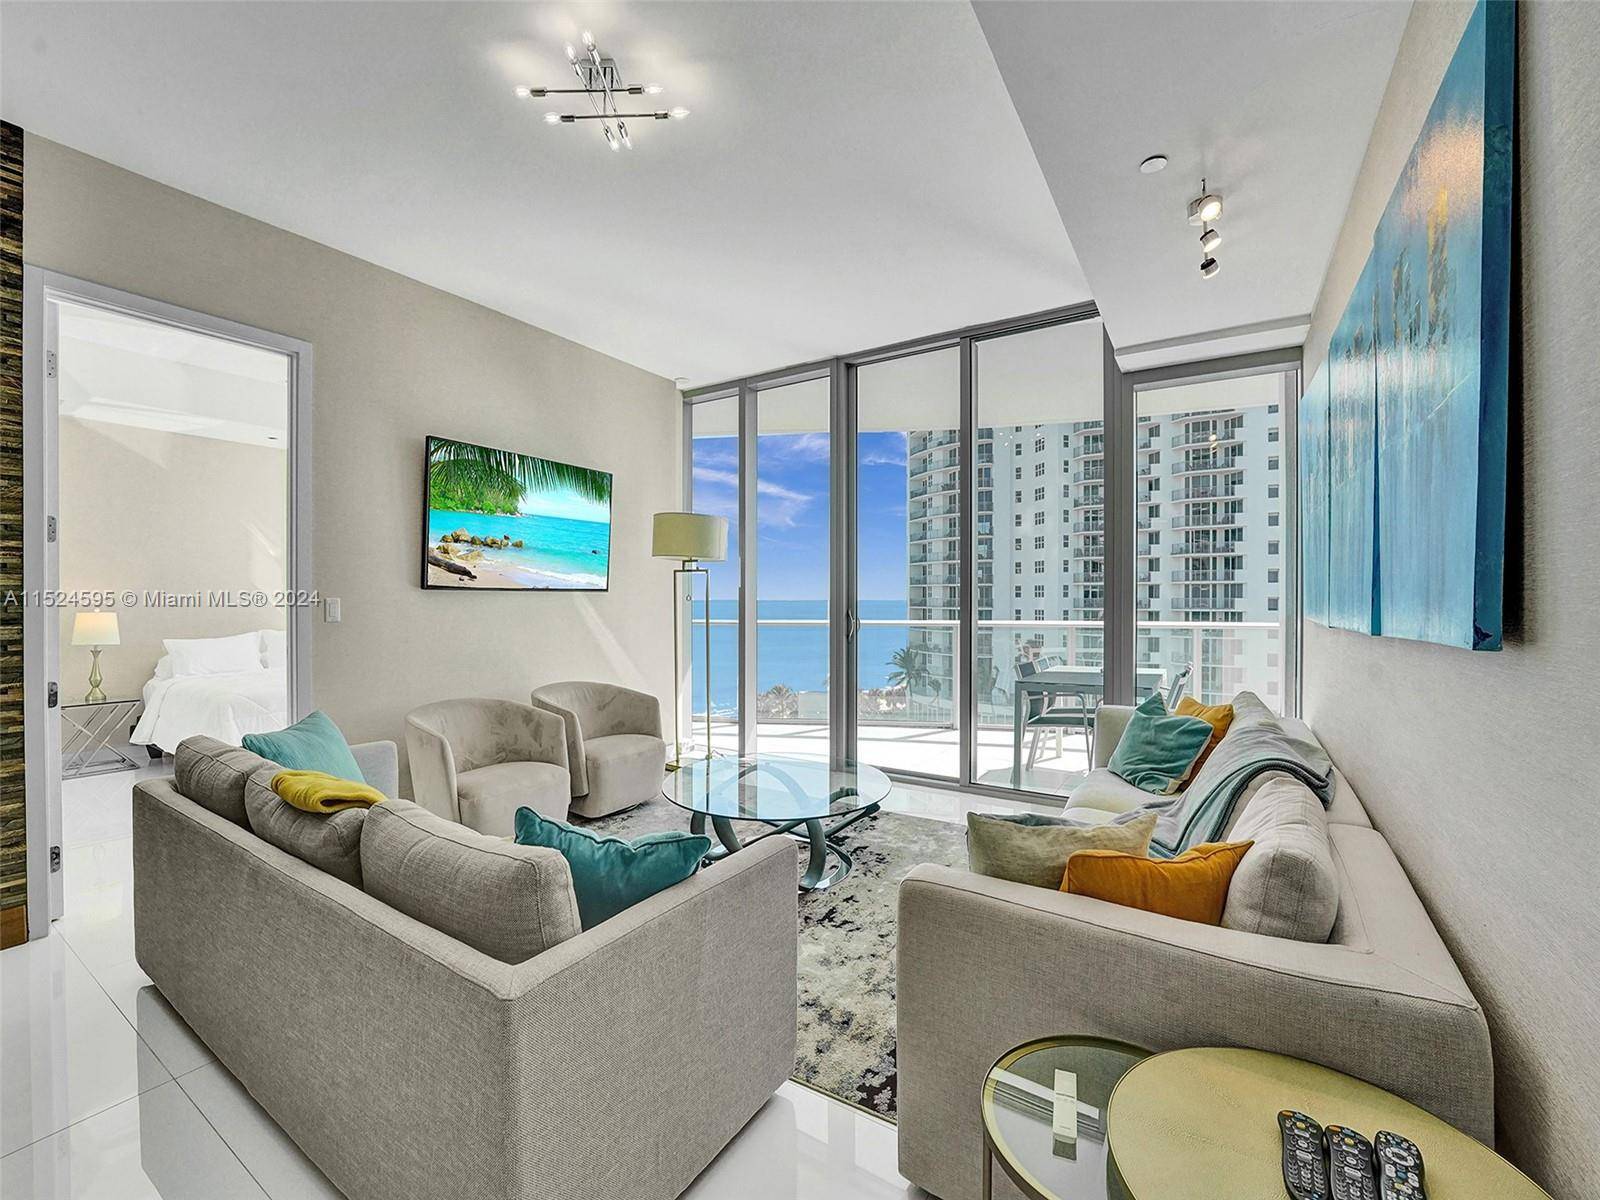 Exclusive opportunity at the Chateau beach Residences, Sunny Isles Beach FL.